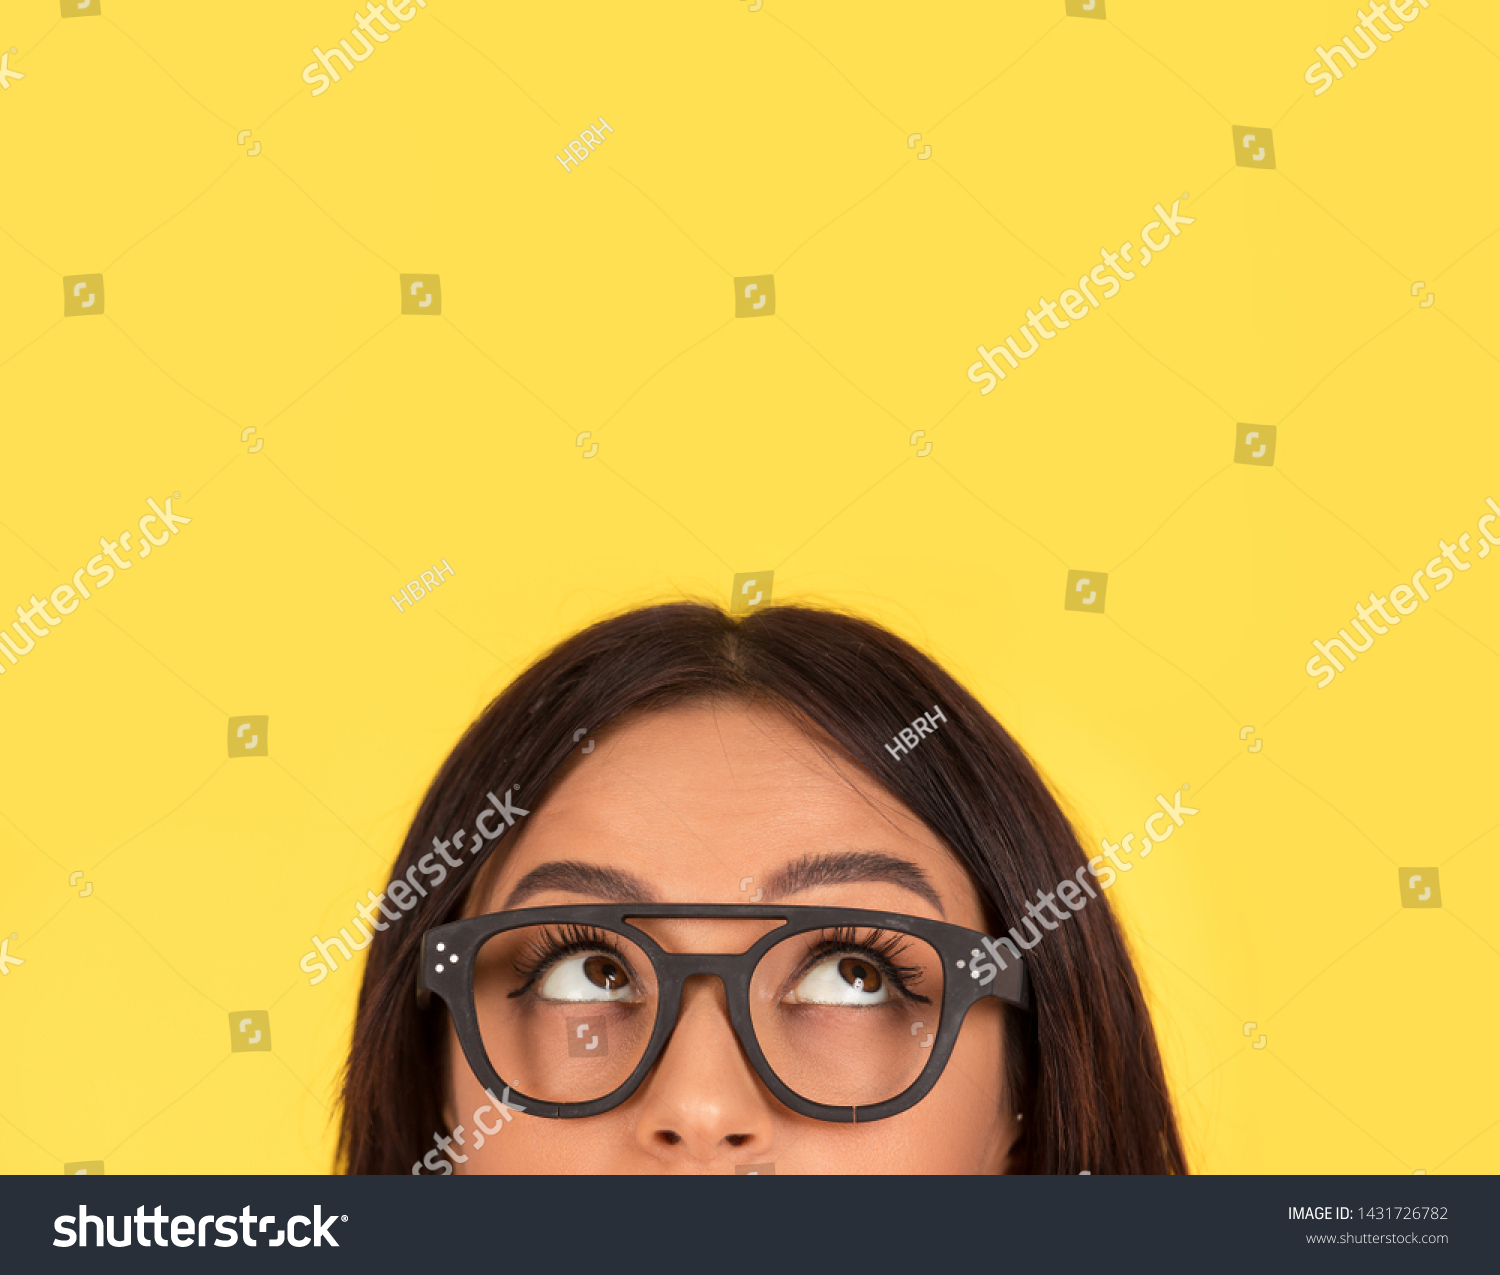 closeup portrait headshot cropped face above lips of cute happy woman in glasses looking up isolated on yellow studio wall background with copy space above head. Human face expressions, emotions #1431726782